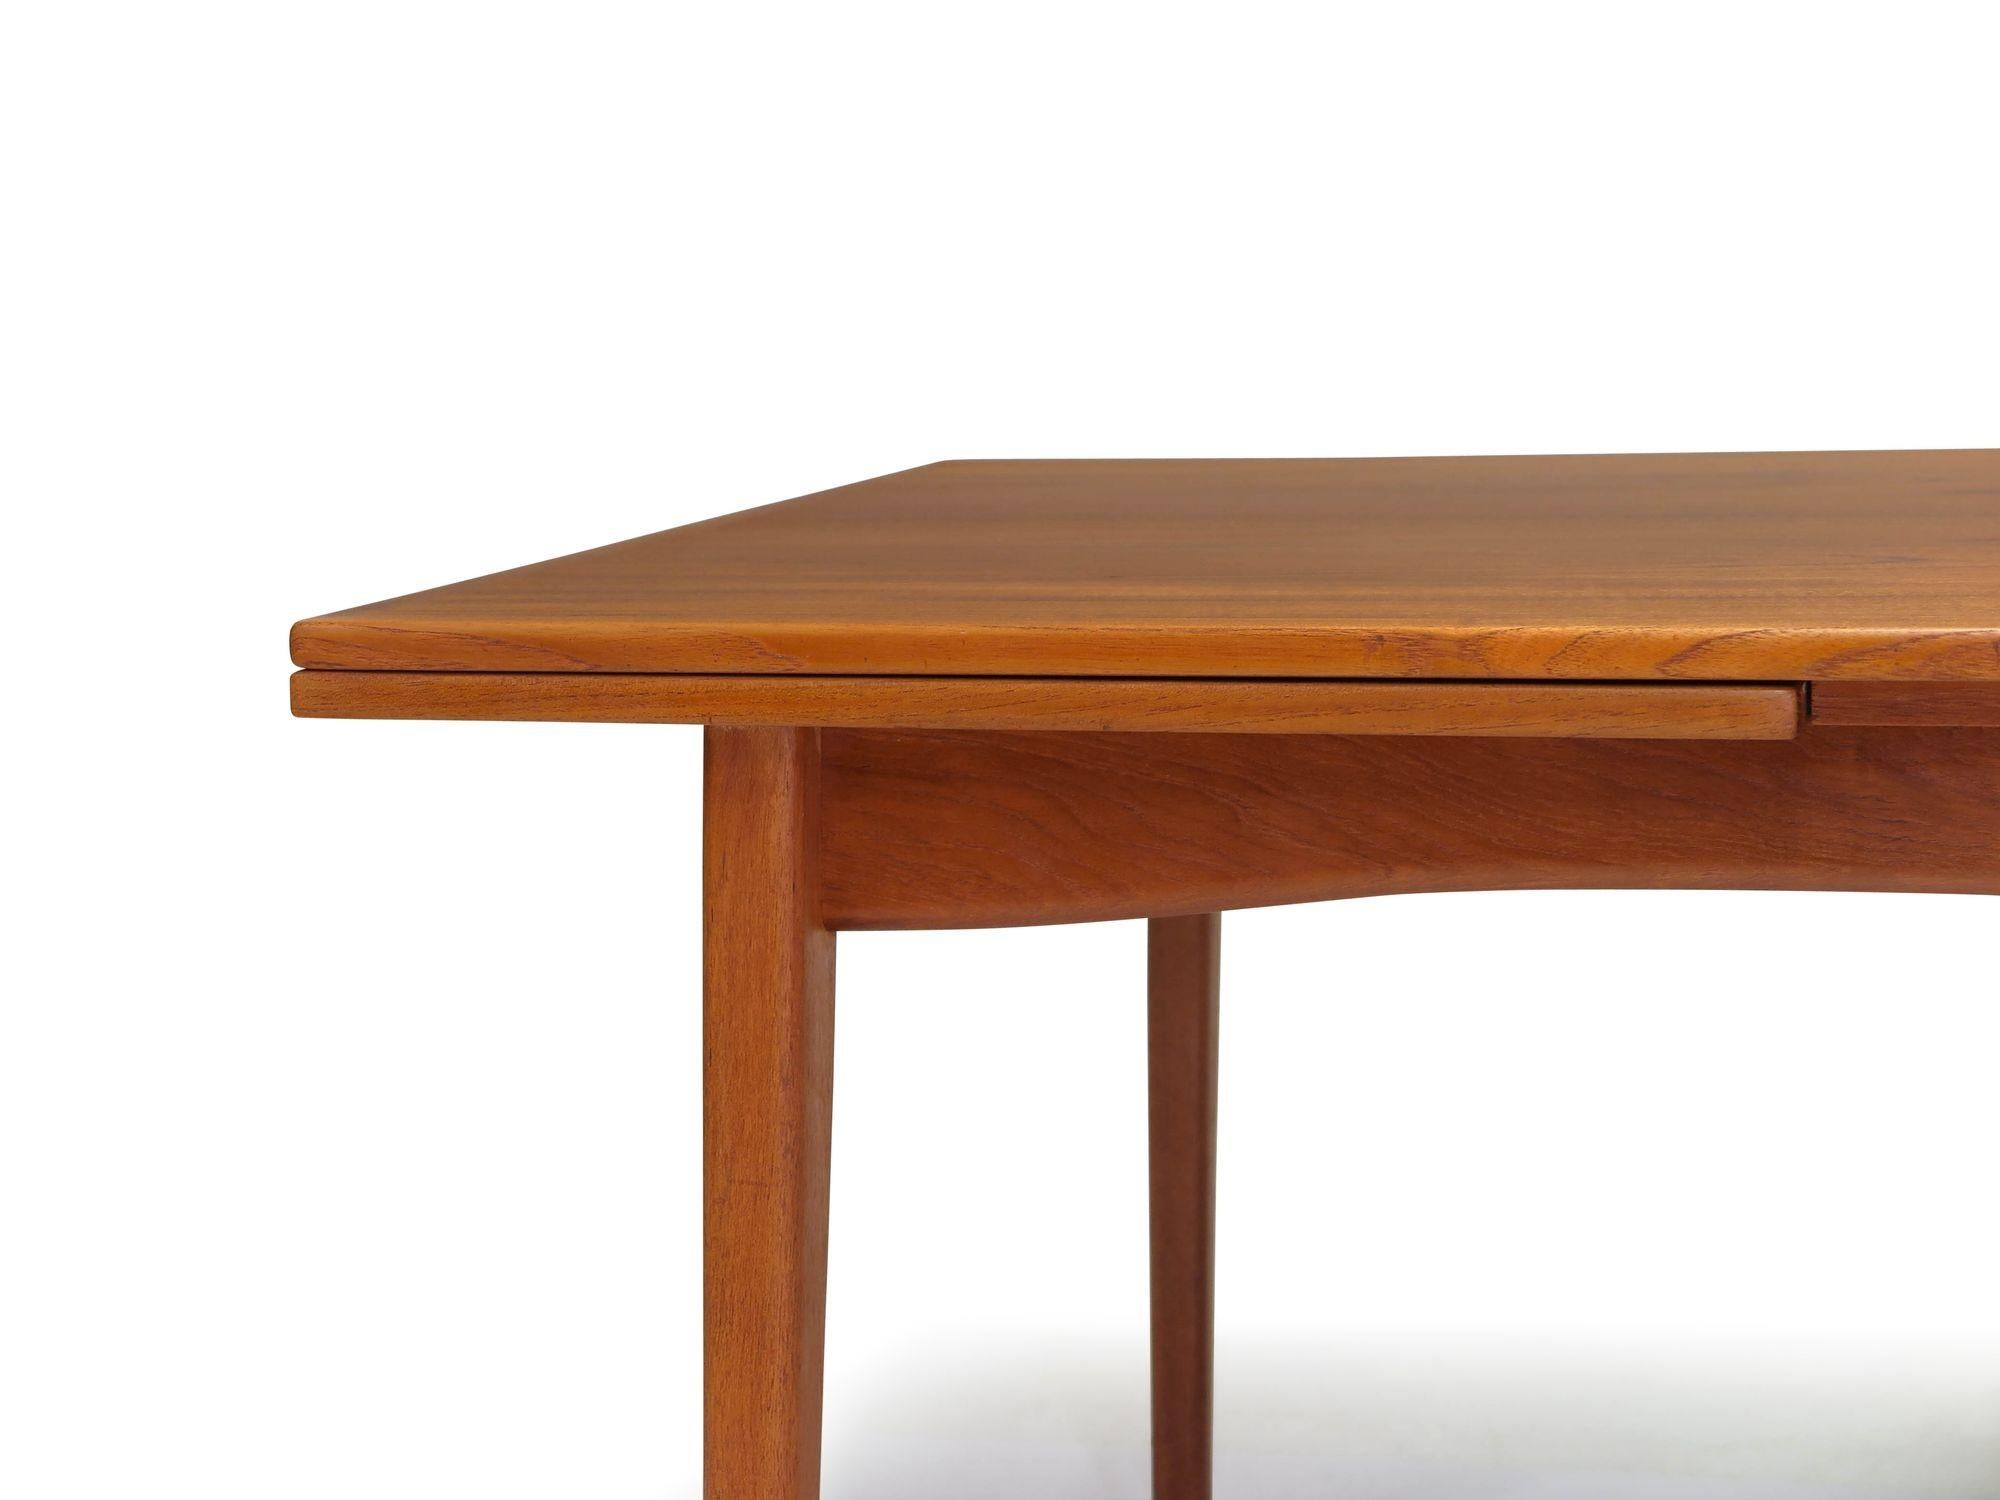 Rectangular teak dining table by H. Sigh & Son, crafted in 1965 in Denmark. This table showcases book-matched grain, solid wood edge banding, and two draw-leaves on either end. Raised on tapered legs, it comfortably seats 6 guests when closed and